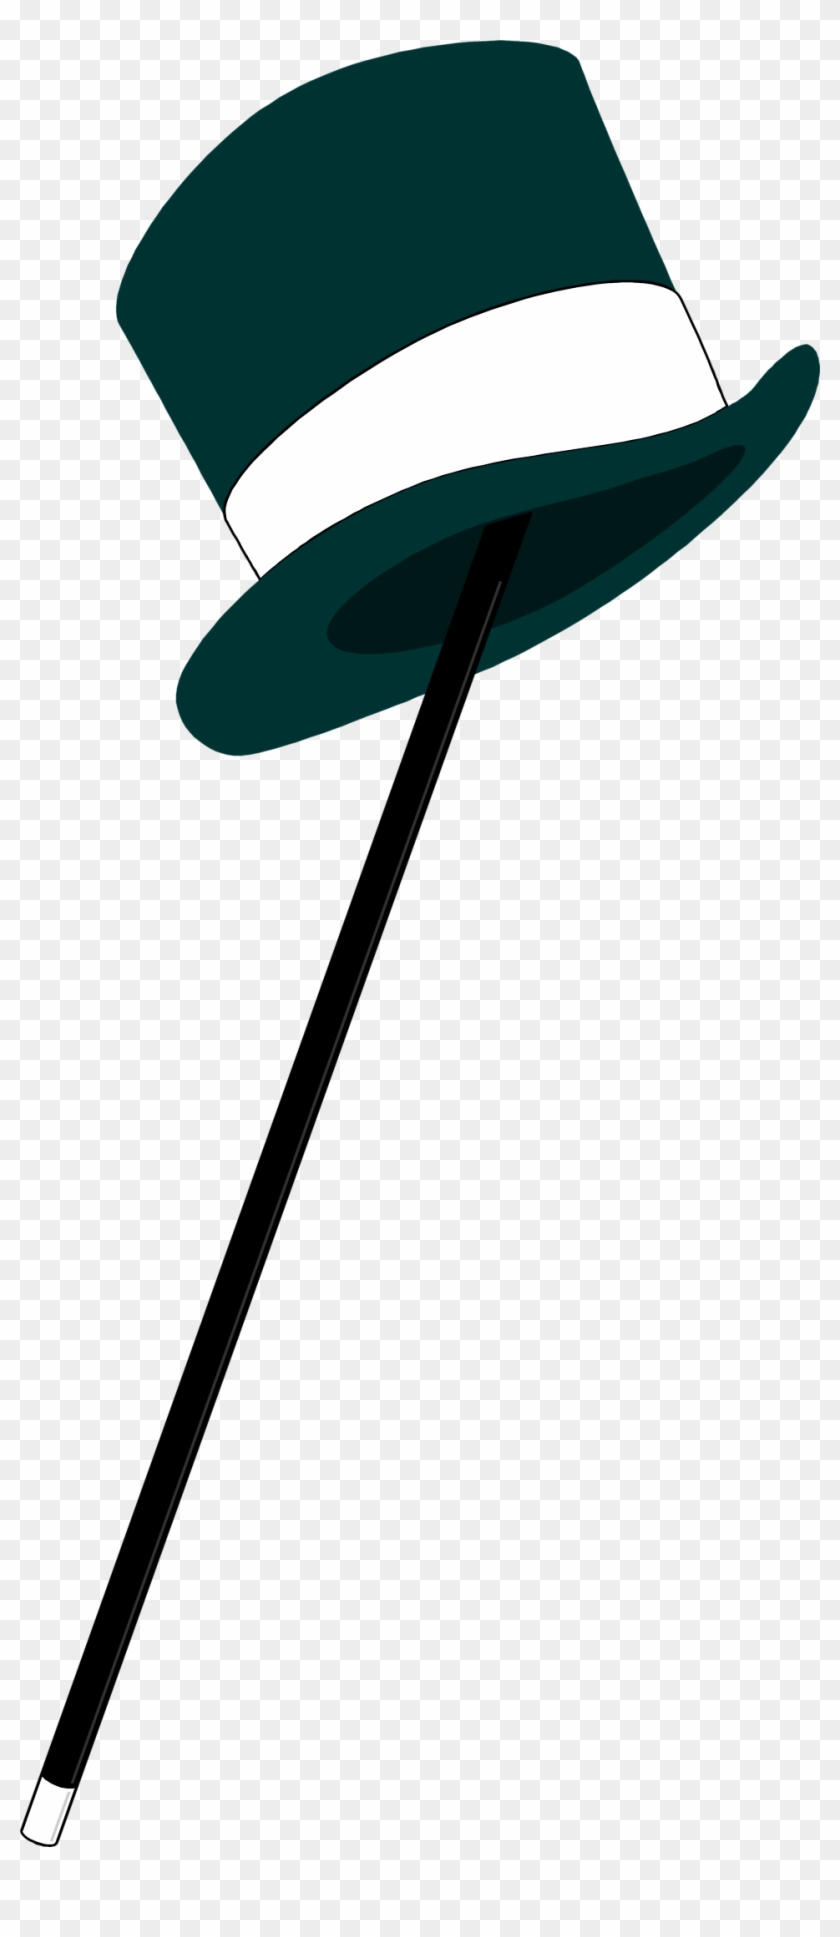 Top Hat And Cane Clipart - Top Hats And Canes #662961